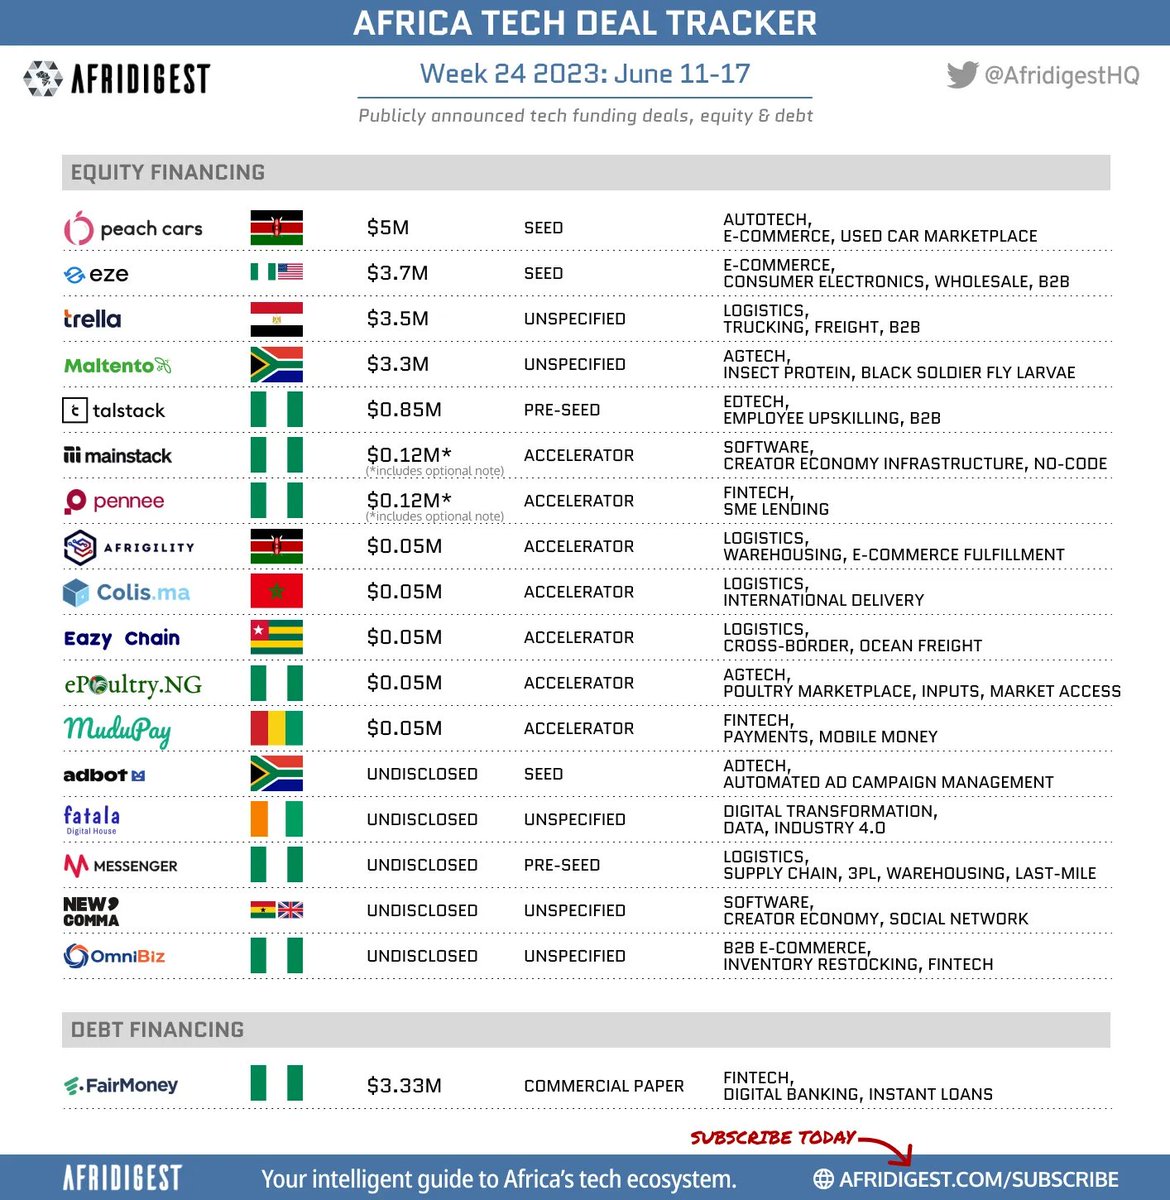 Last week was one of the busiest in a while in terms of the number of announced tech fundraises across Africa

Credit: @AfridigestHQ

Subscribe to afridigest.com/subscribe to stay in the know about what's happening in #AfricaTech